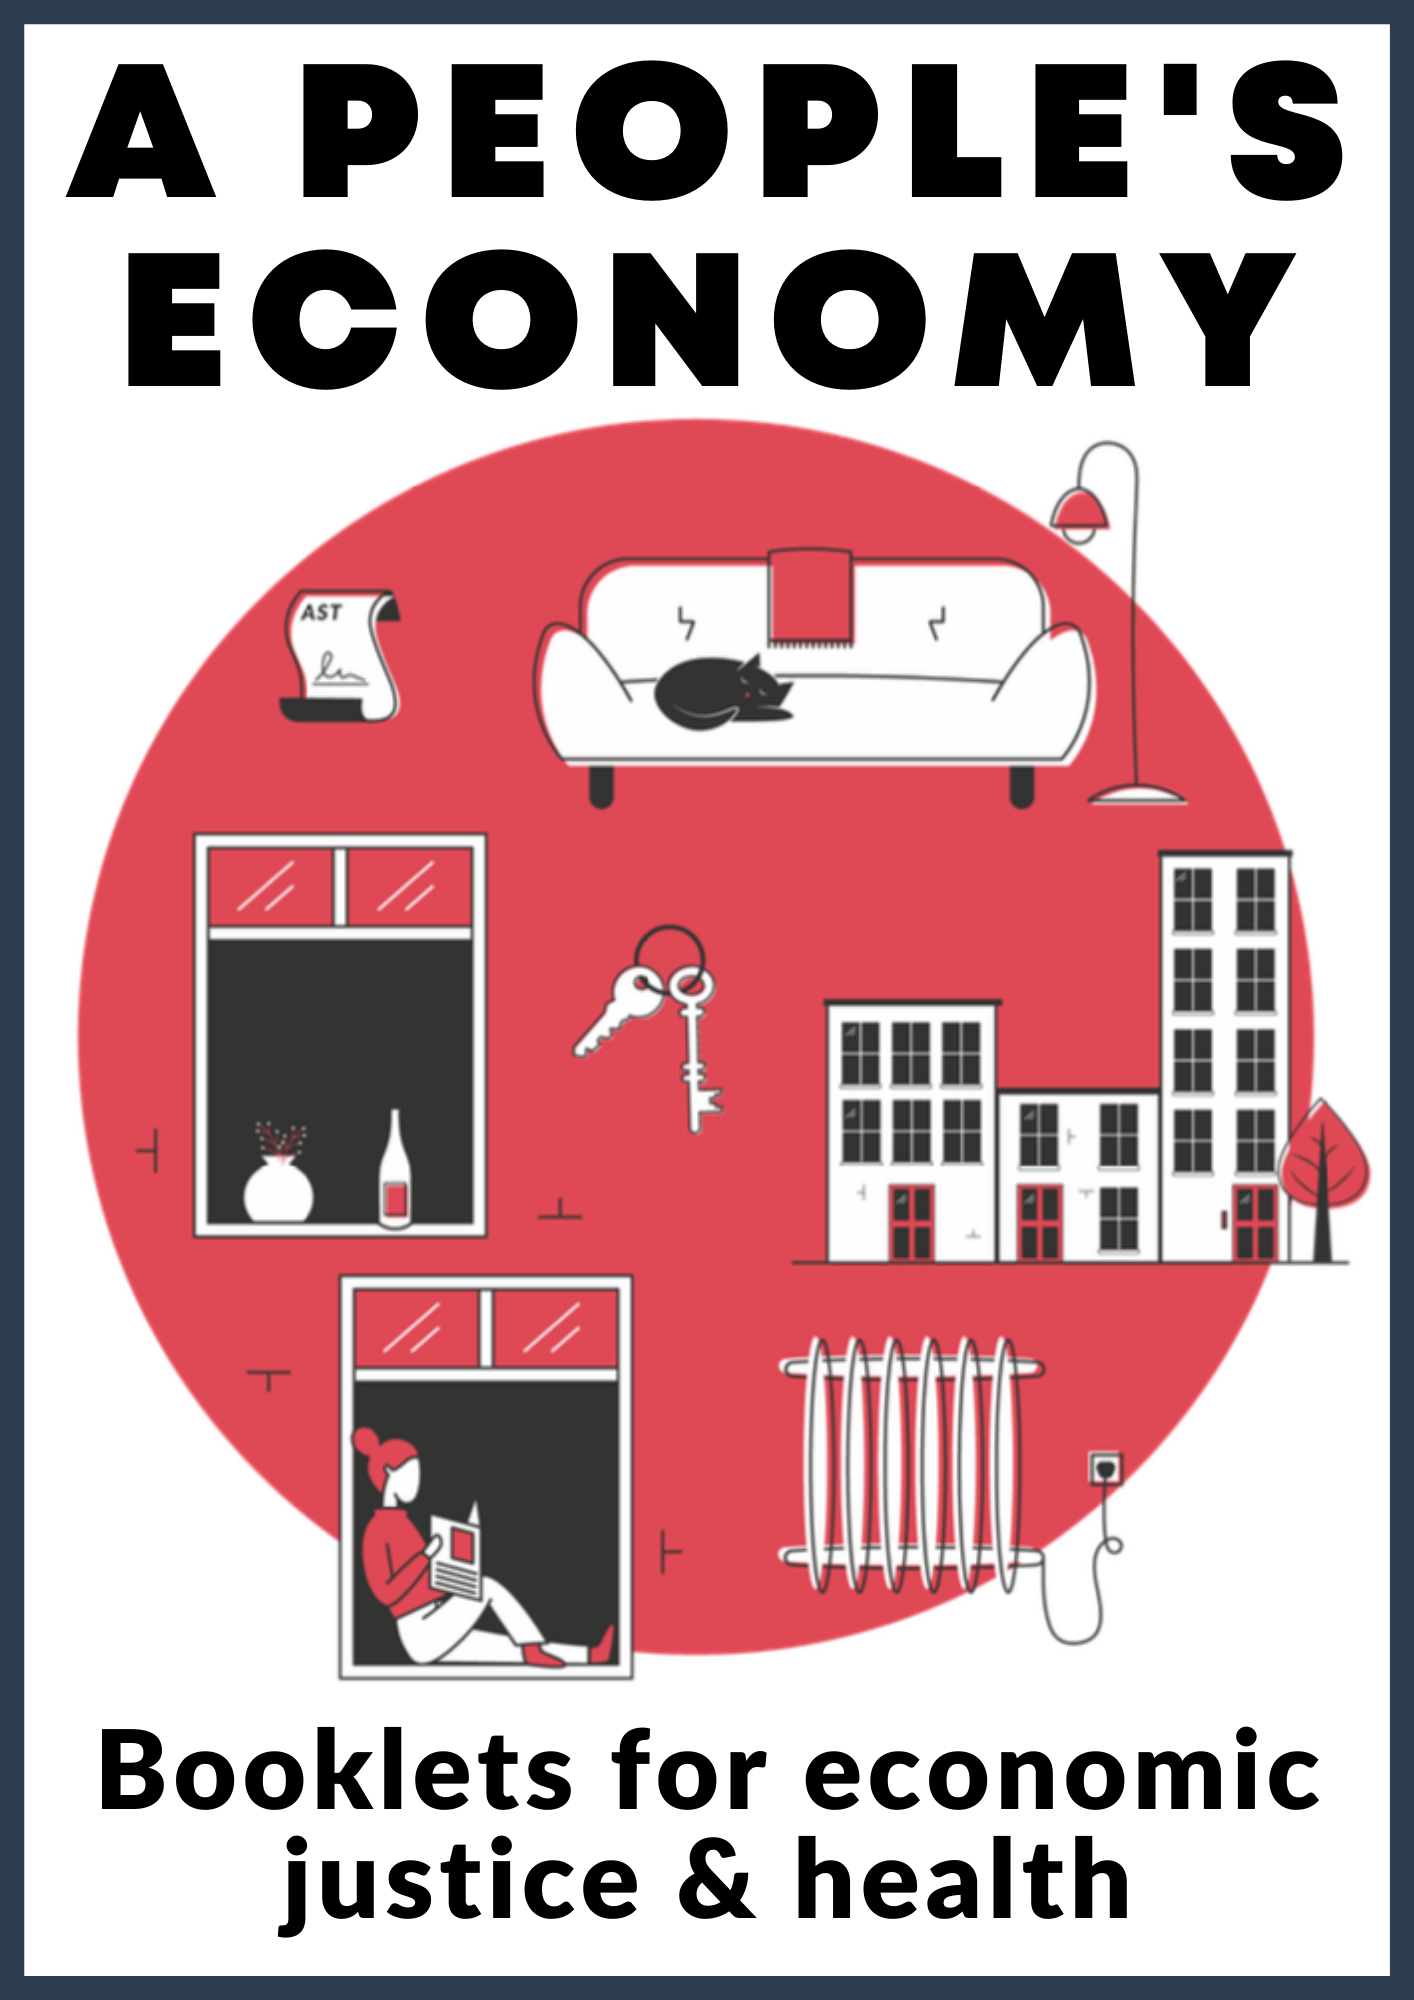 A People’s Economy: economic justice & health booklets